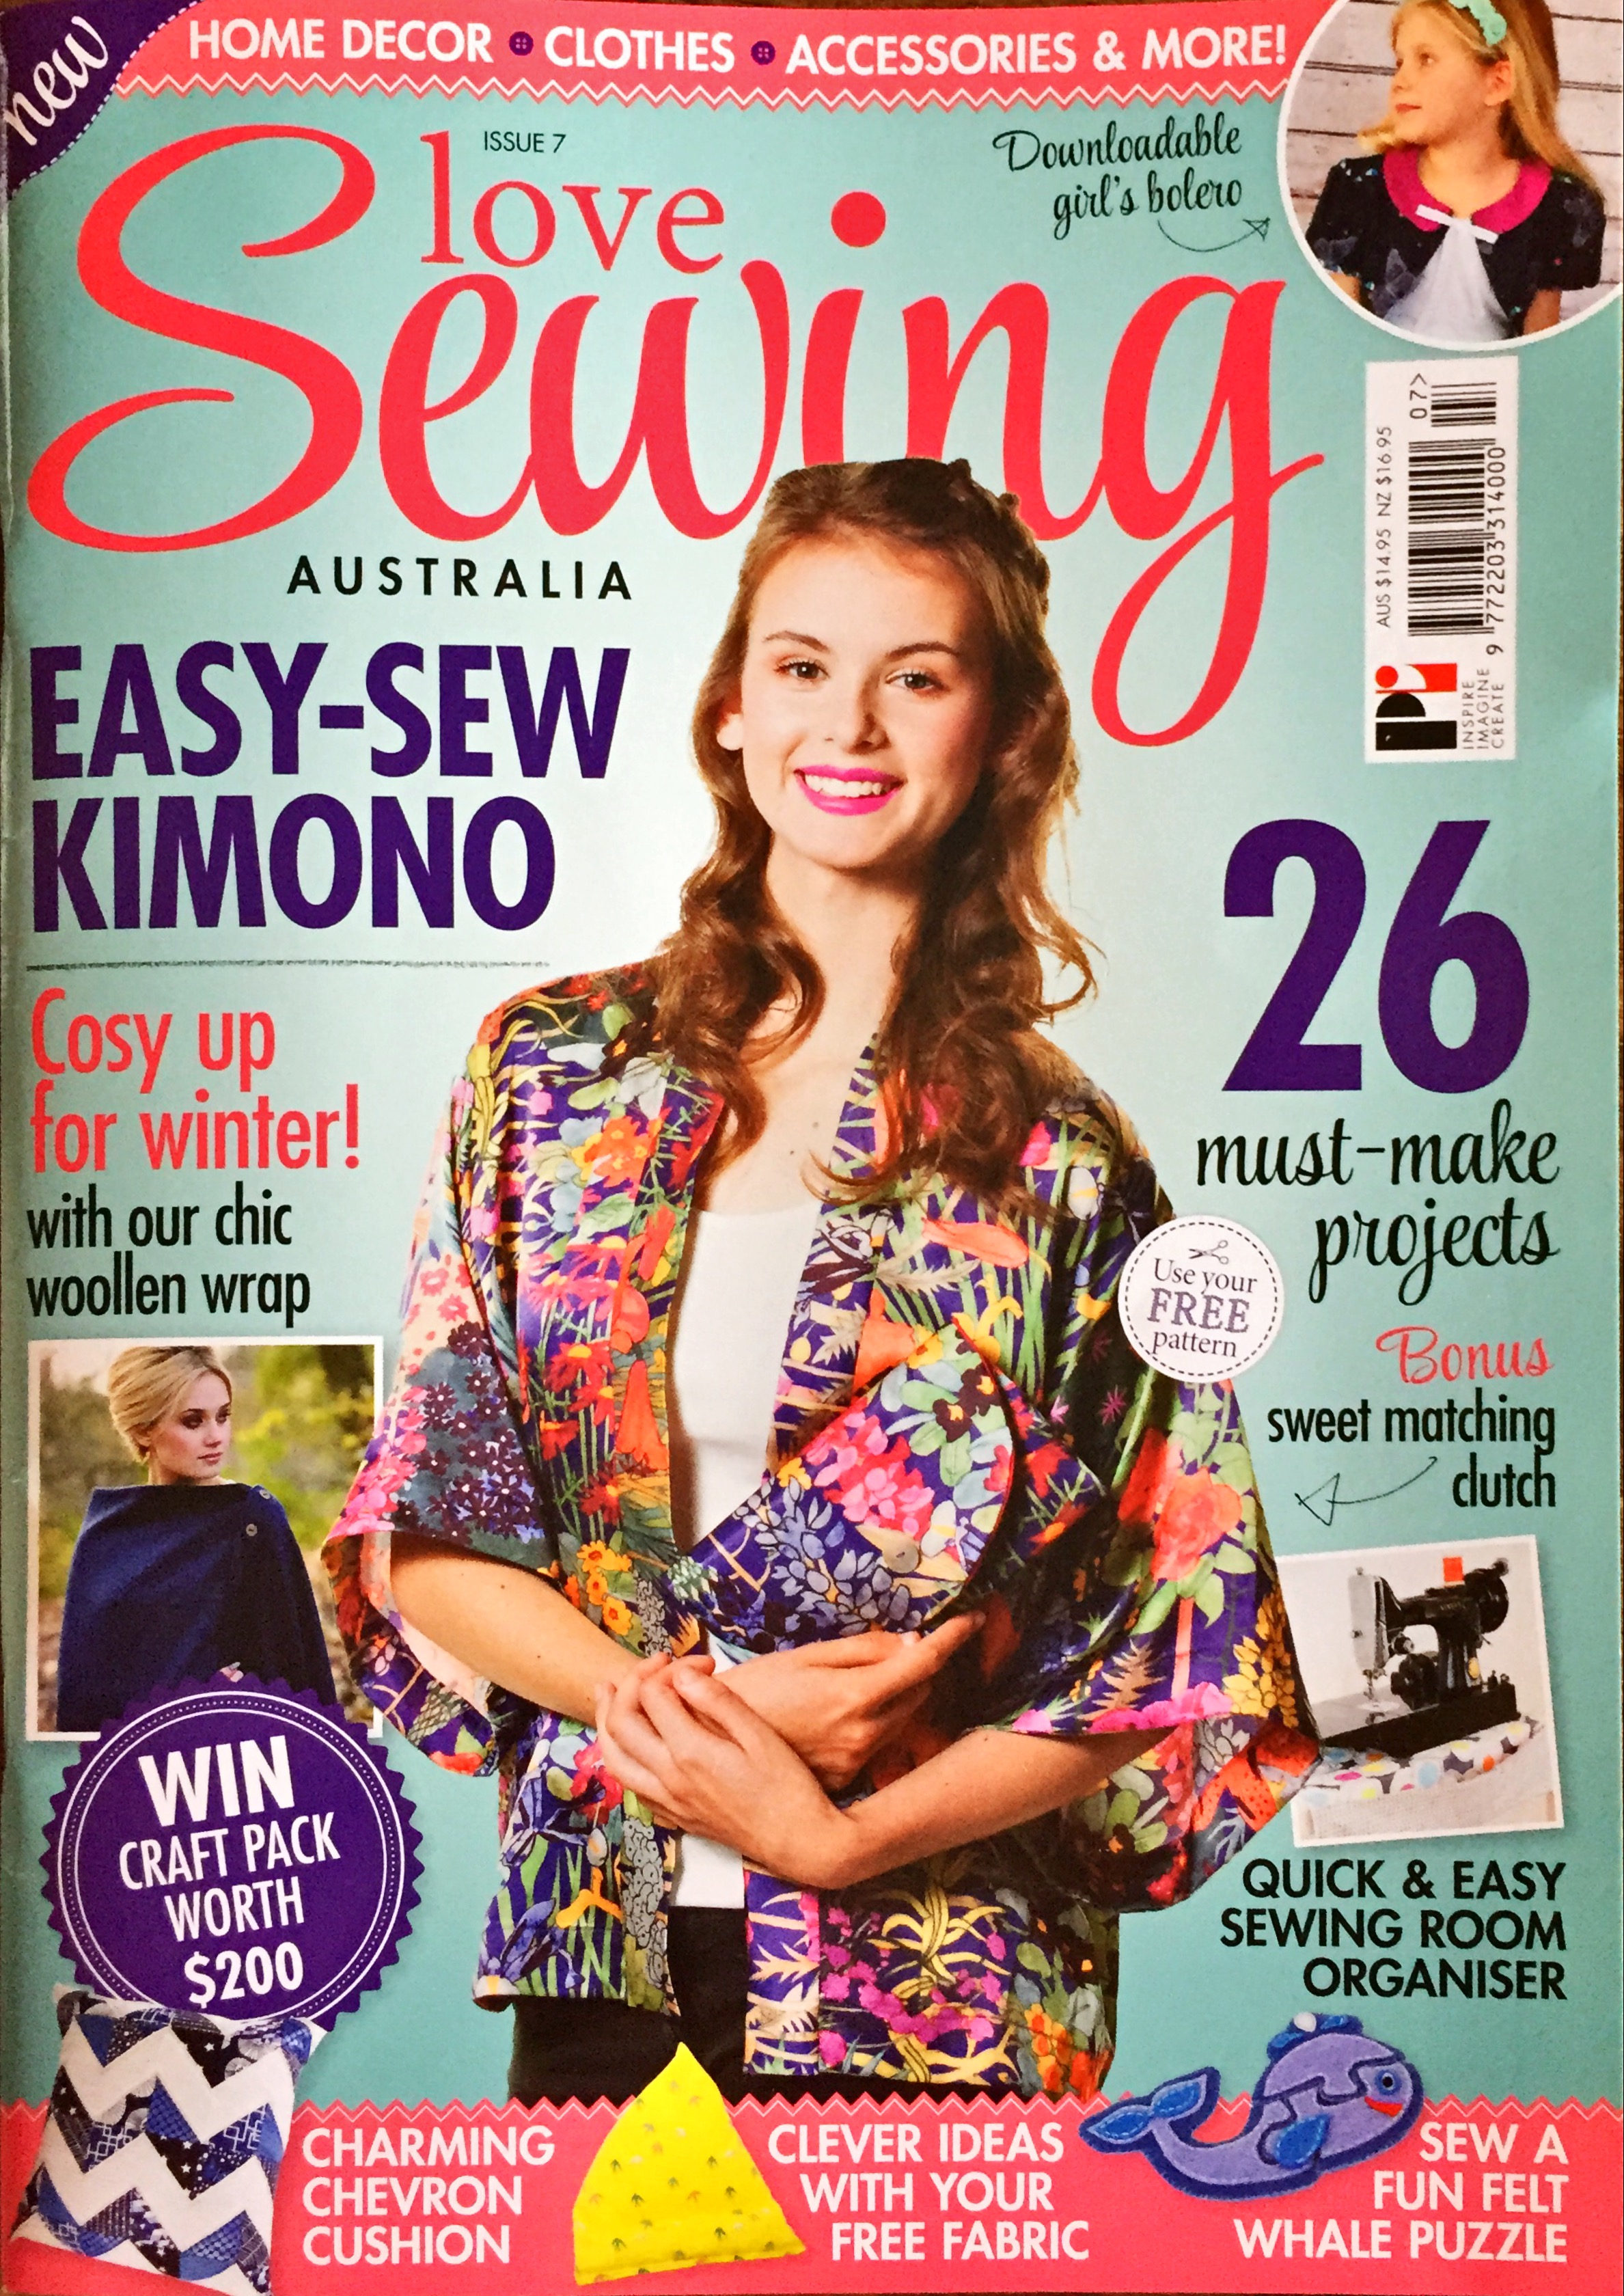 Guess Who's in Love Sewing Magazine this Month? {And New Idea too!}